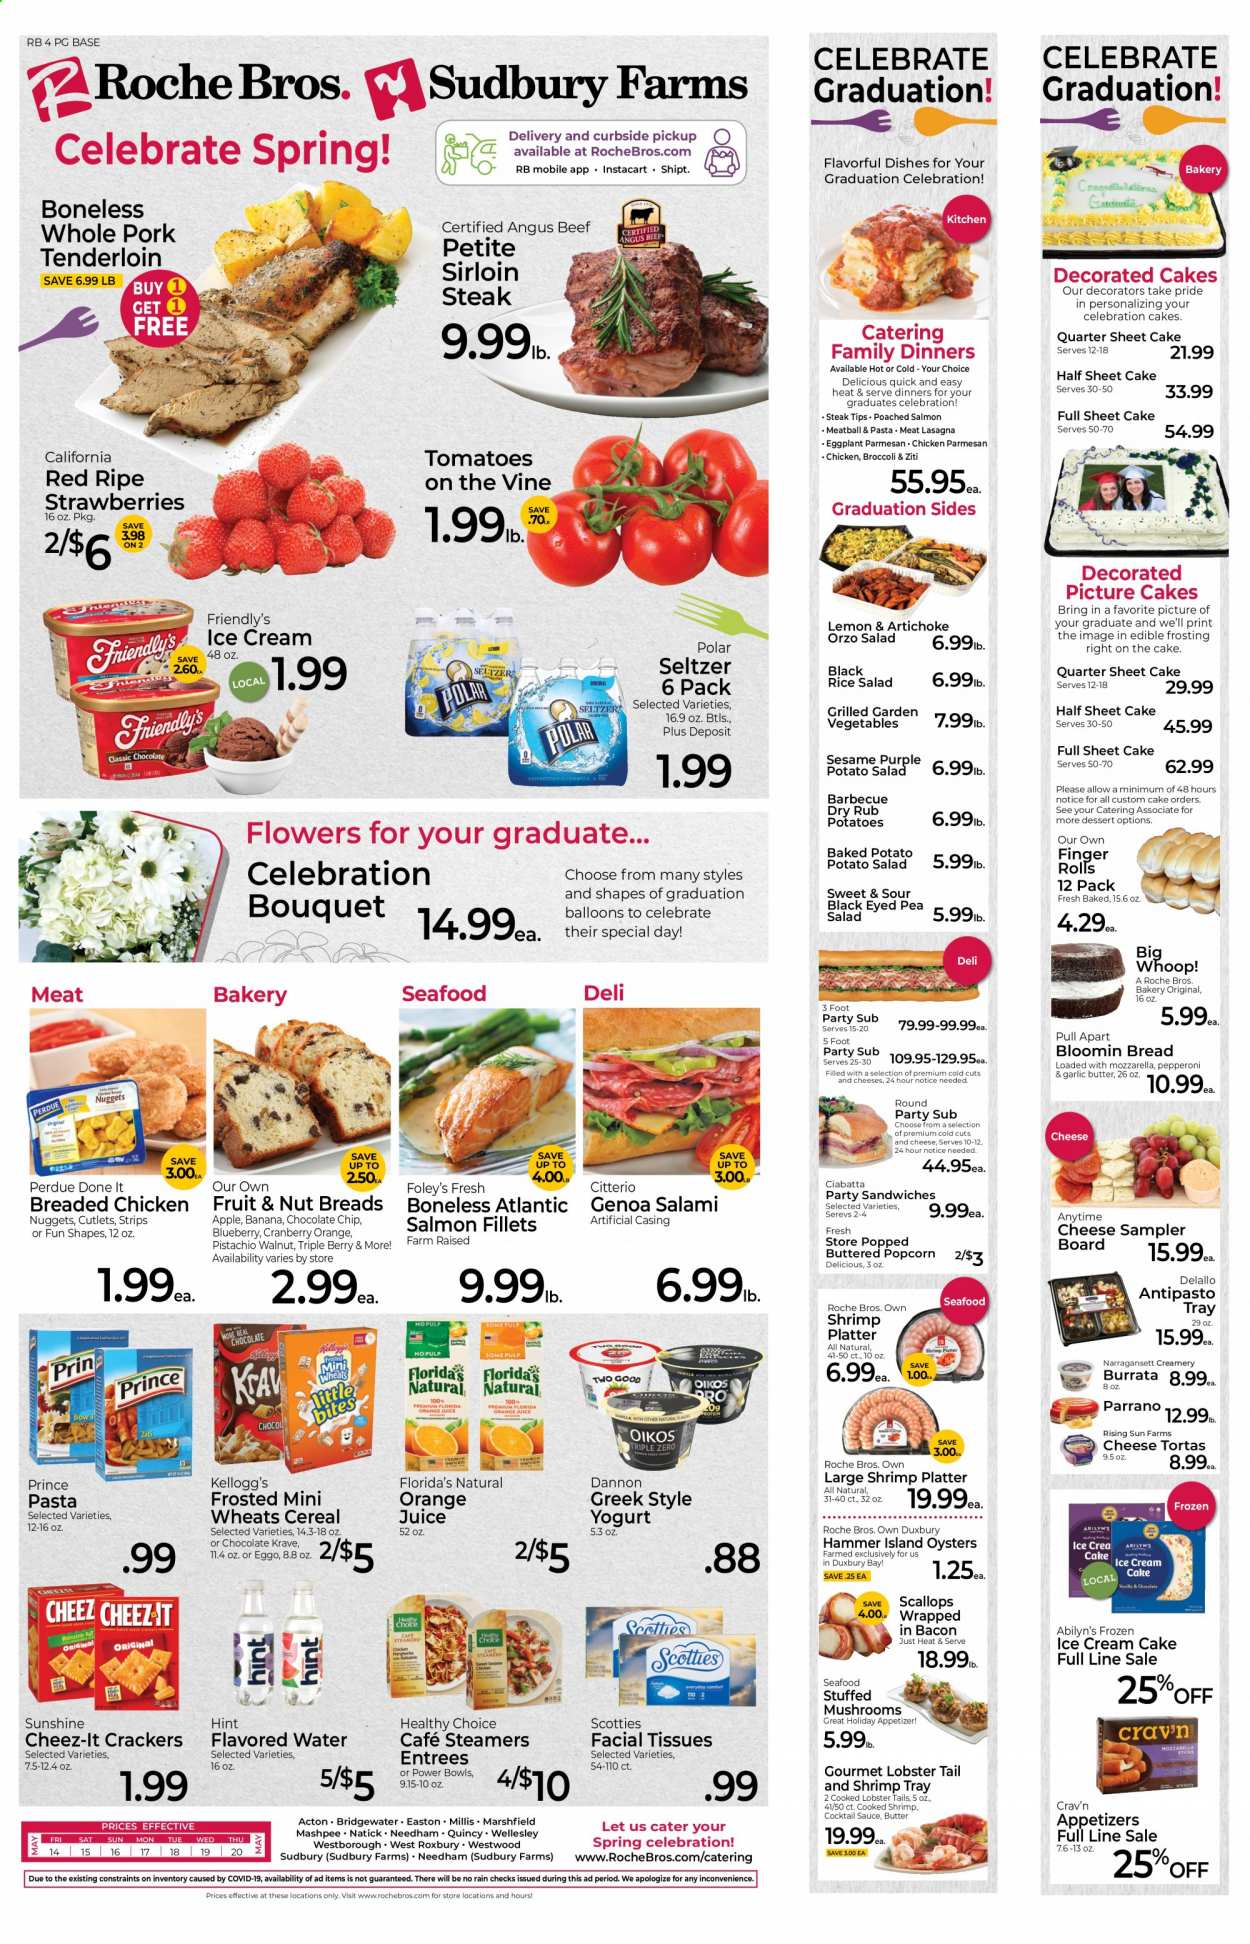 thumbnail - Roche Bros. Flyer - 05/14/2021 - 05/20/2021 - Sales products - bread, ciabatta, cake, broccoli, tomatoes, potatoes, strawberries, bacon wrapped scallops, lobster, salmon, salmon fillet, scallops, oysters, seafood, lobster tail, shrimps, sandwich, nuggets, pasta, fried chicken, lasagna meal, Healthy Choice, Perdue®, bacon, salami, pepperoni, potato salad, yoghurt, Dannon, butter, Sunshine, ice cream, Friendly's Ice Cream, strips, chocolate chips, Celebration, crackers, Kellogg's, Florida's Natural, popcorn, Cheez-It, frosting, cereals, rice, cocktail sauce, orange juice, juice, seltzer water, flavored water, beef meat, beef sirloin, steak, sirloin steak, pork meat, pork tenderloin, tissues, facial tissues, bouquet. Page 1.